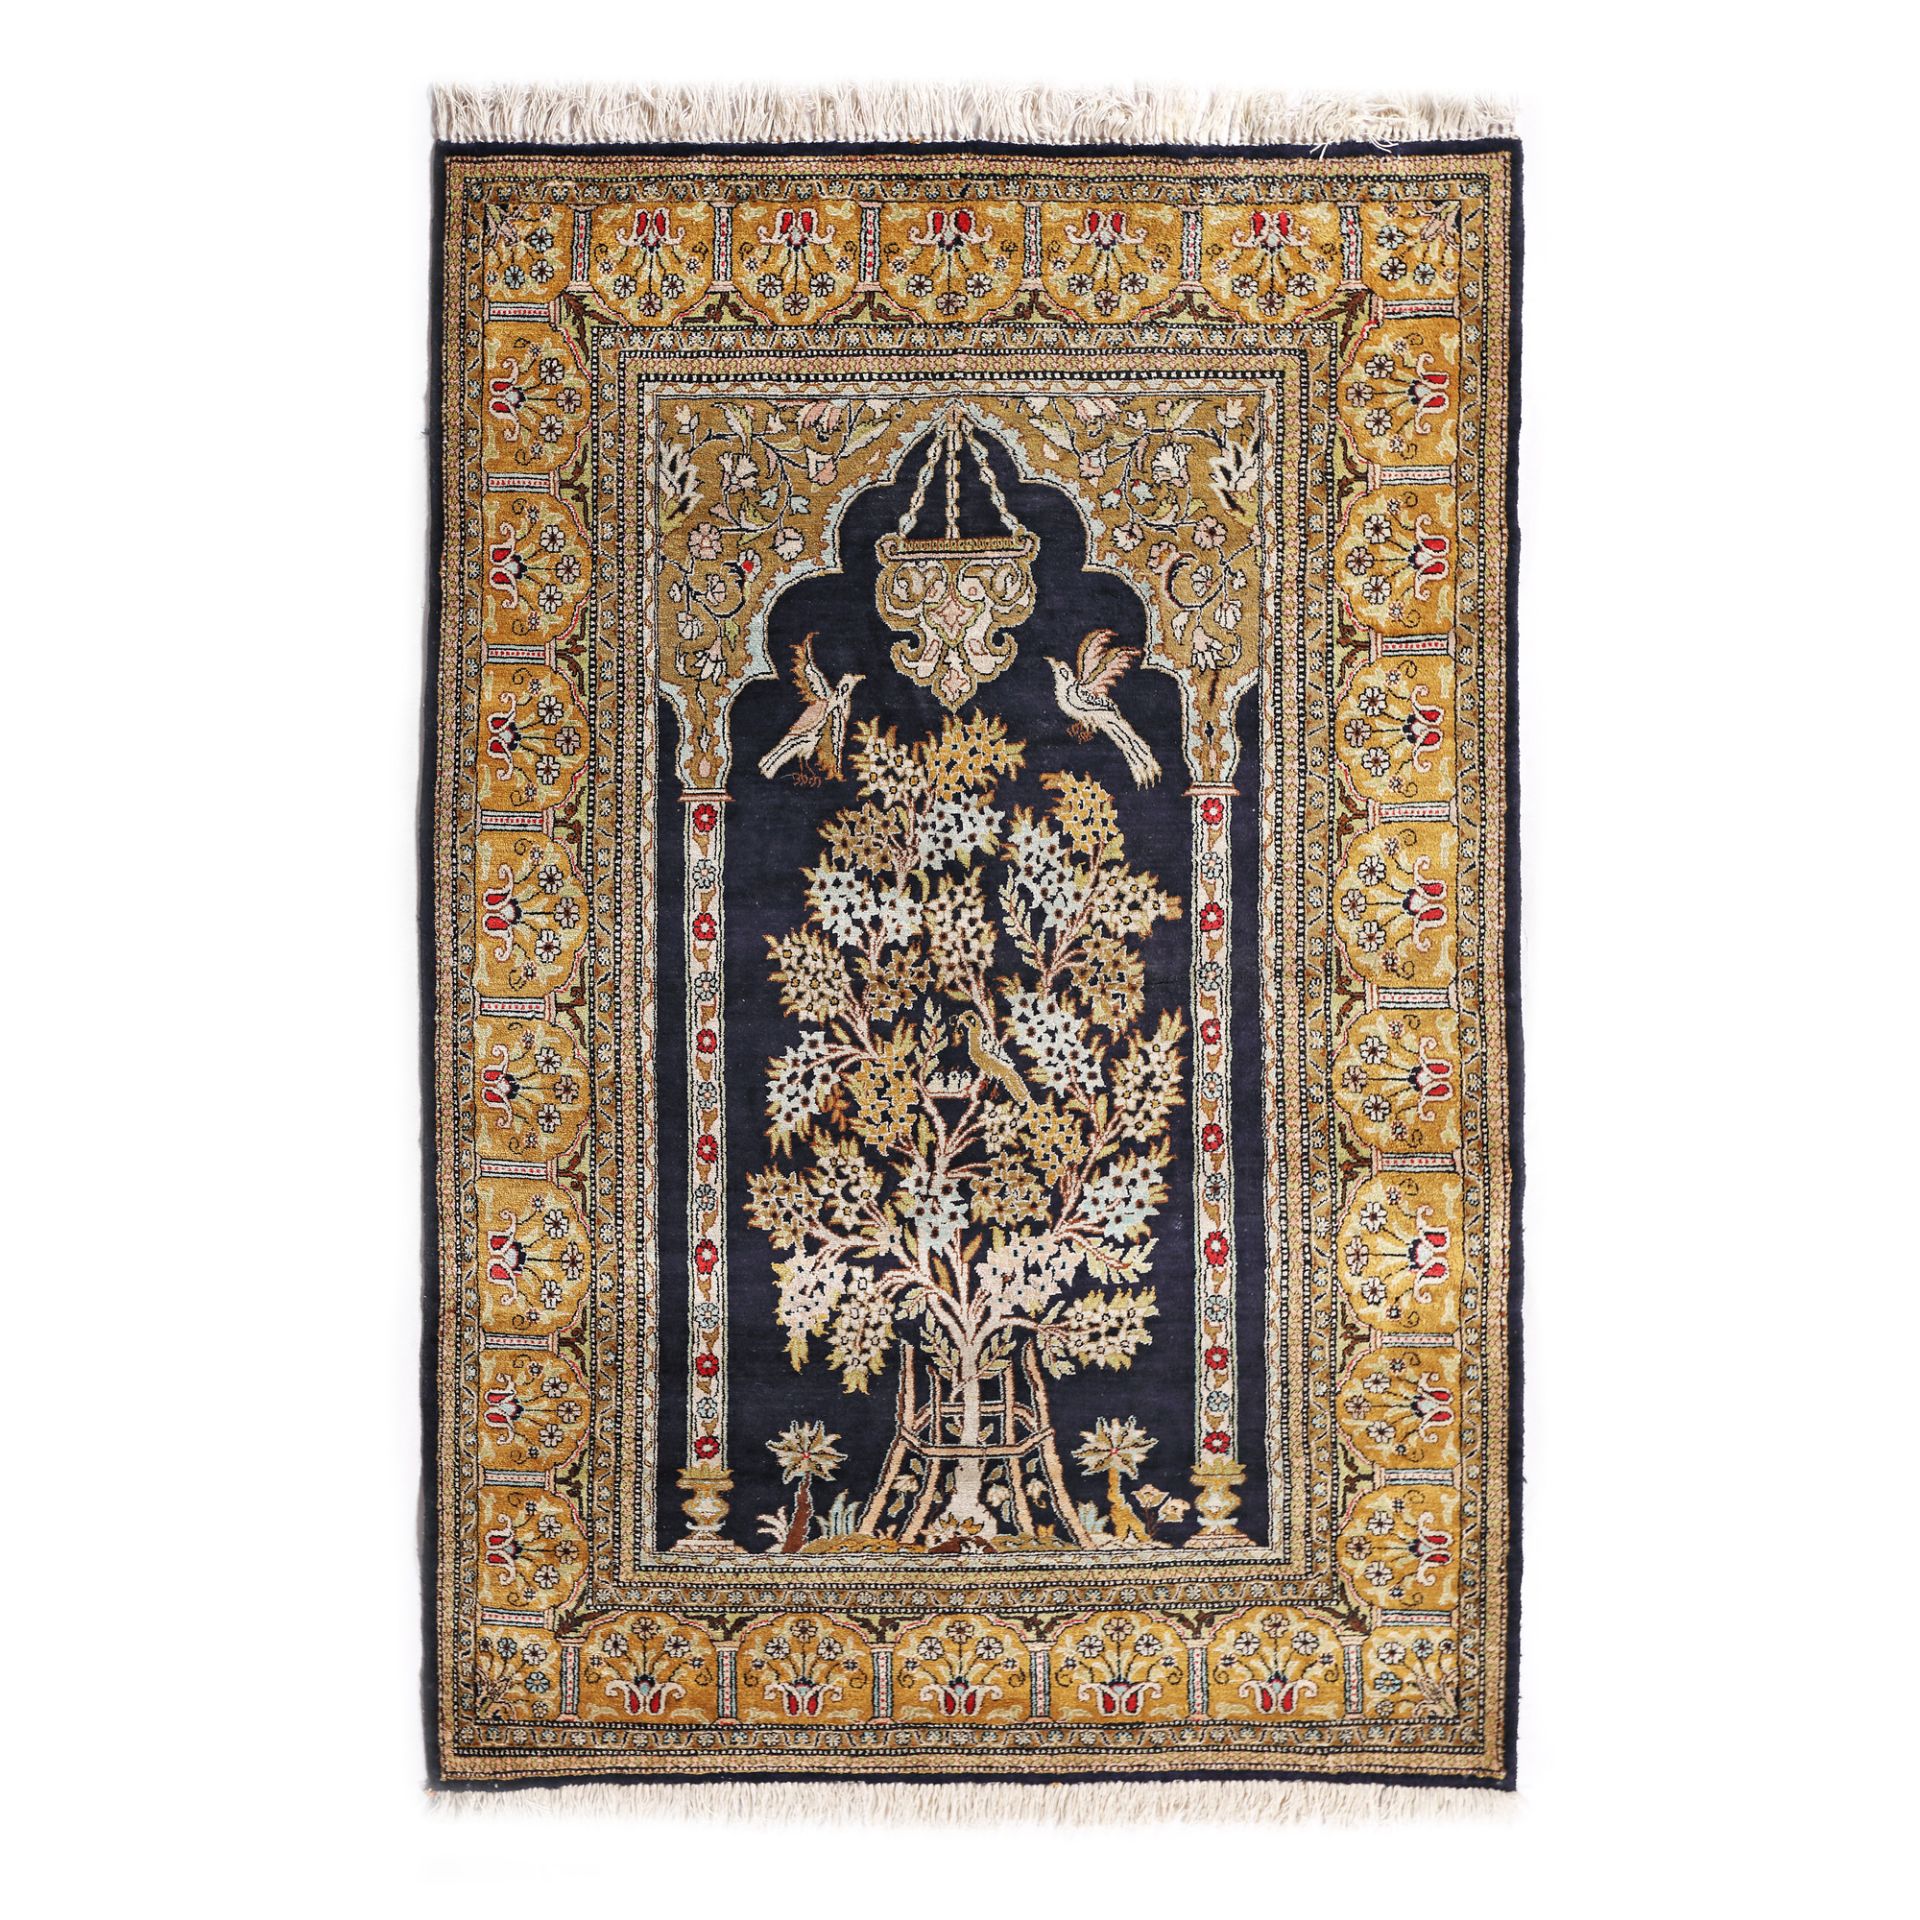 Kashmir prayer mat, silk, decorated with the tree of life motif in the mihrab, India